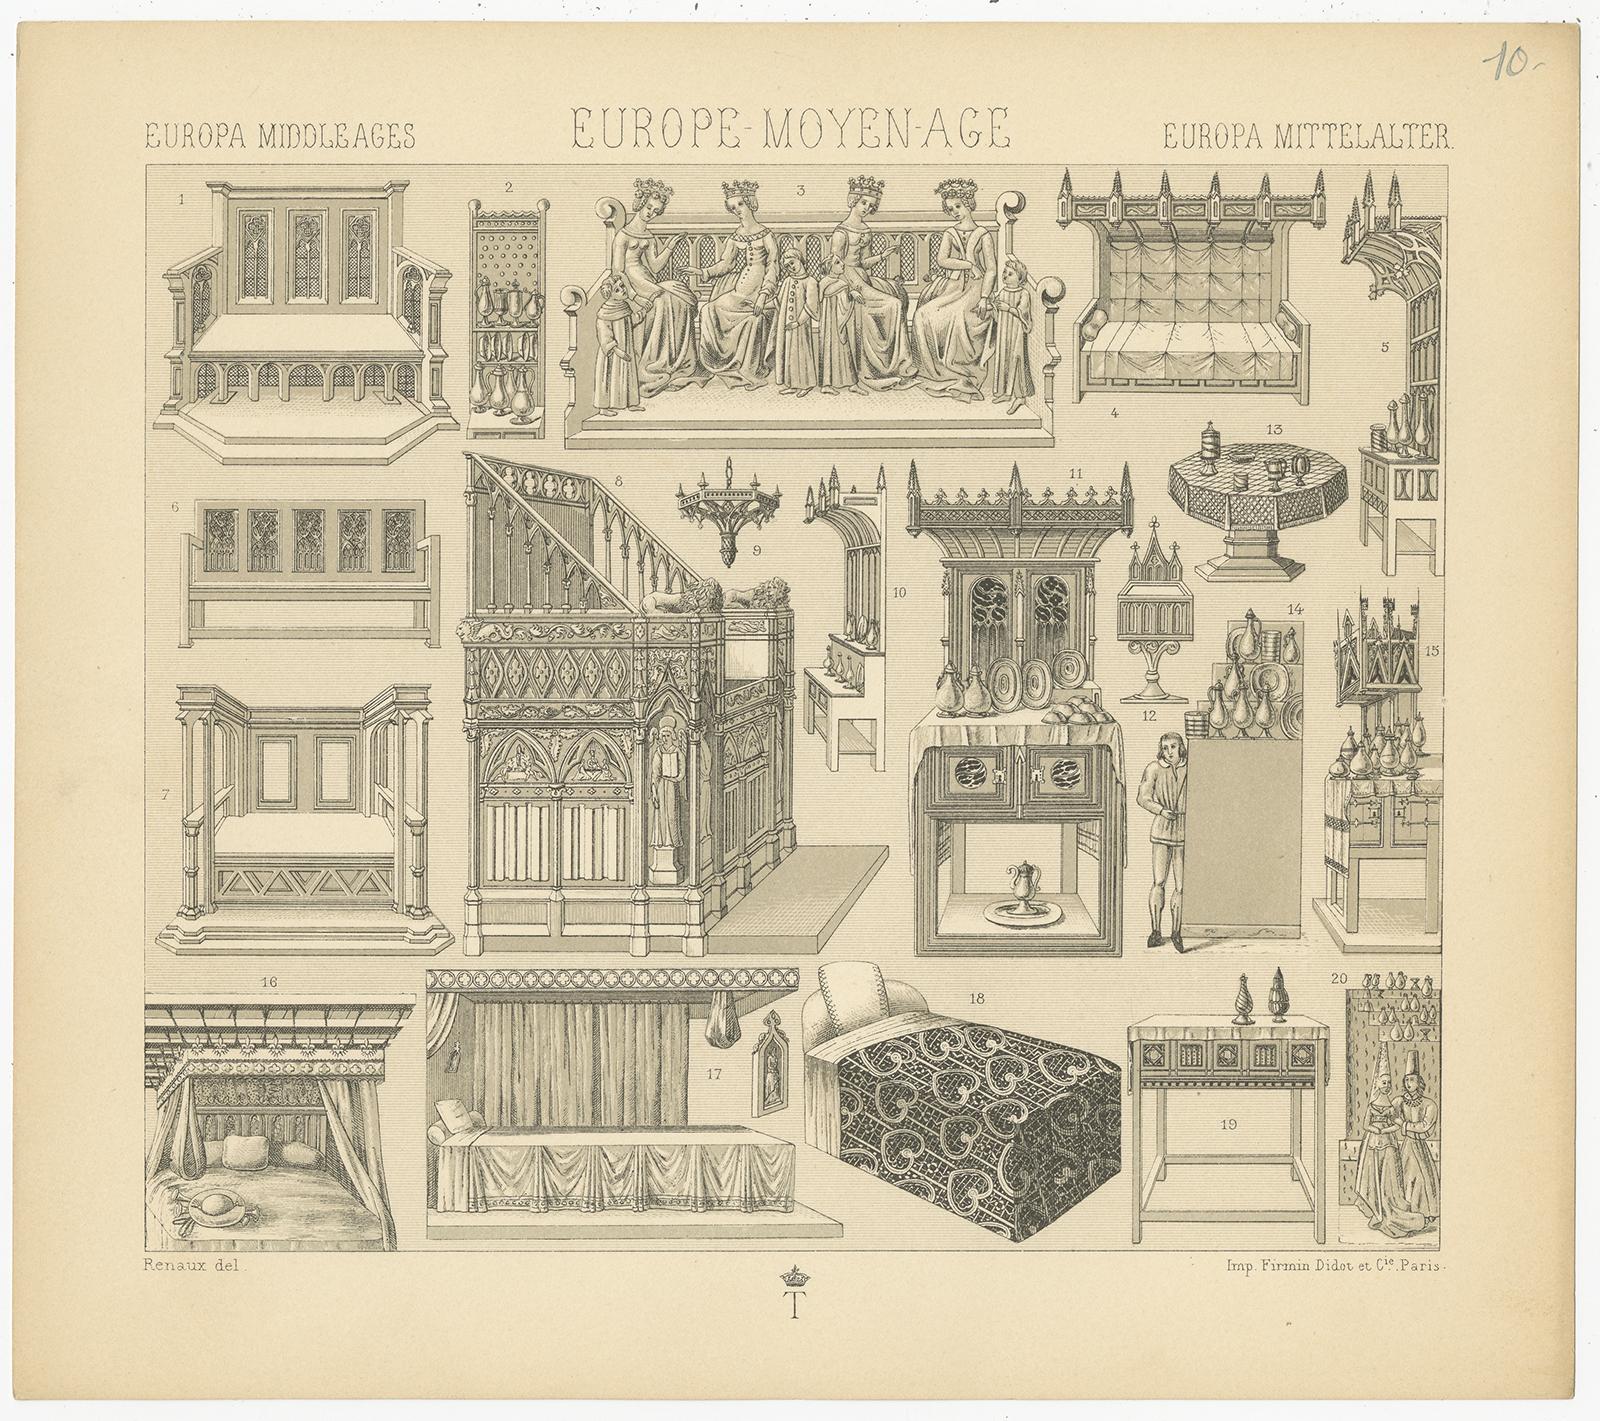 Antique print titled 'Europa Middle Ages - Europe Moyen Age - Europa Mittelalter'. Chromolithograph of European Middle Ages Furniture. This print originates from 'Le Costume Historique' by M.A. Racinet. Published, circa 1880.